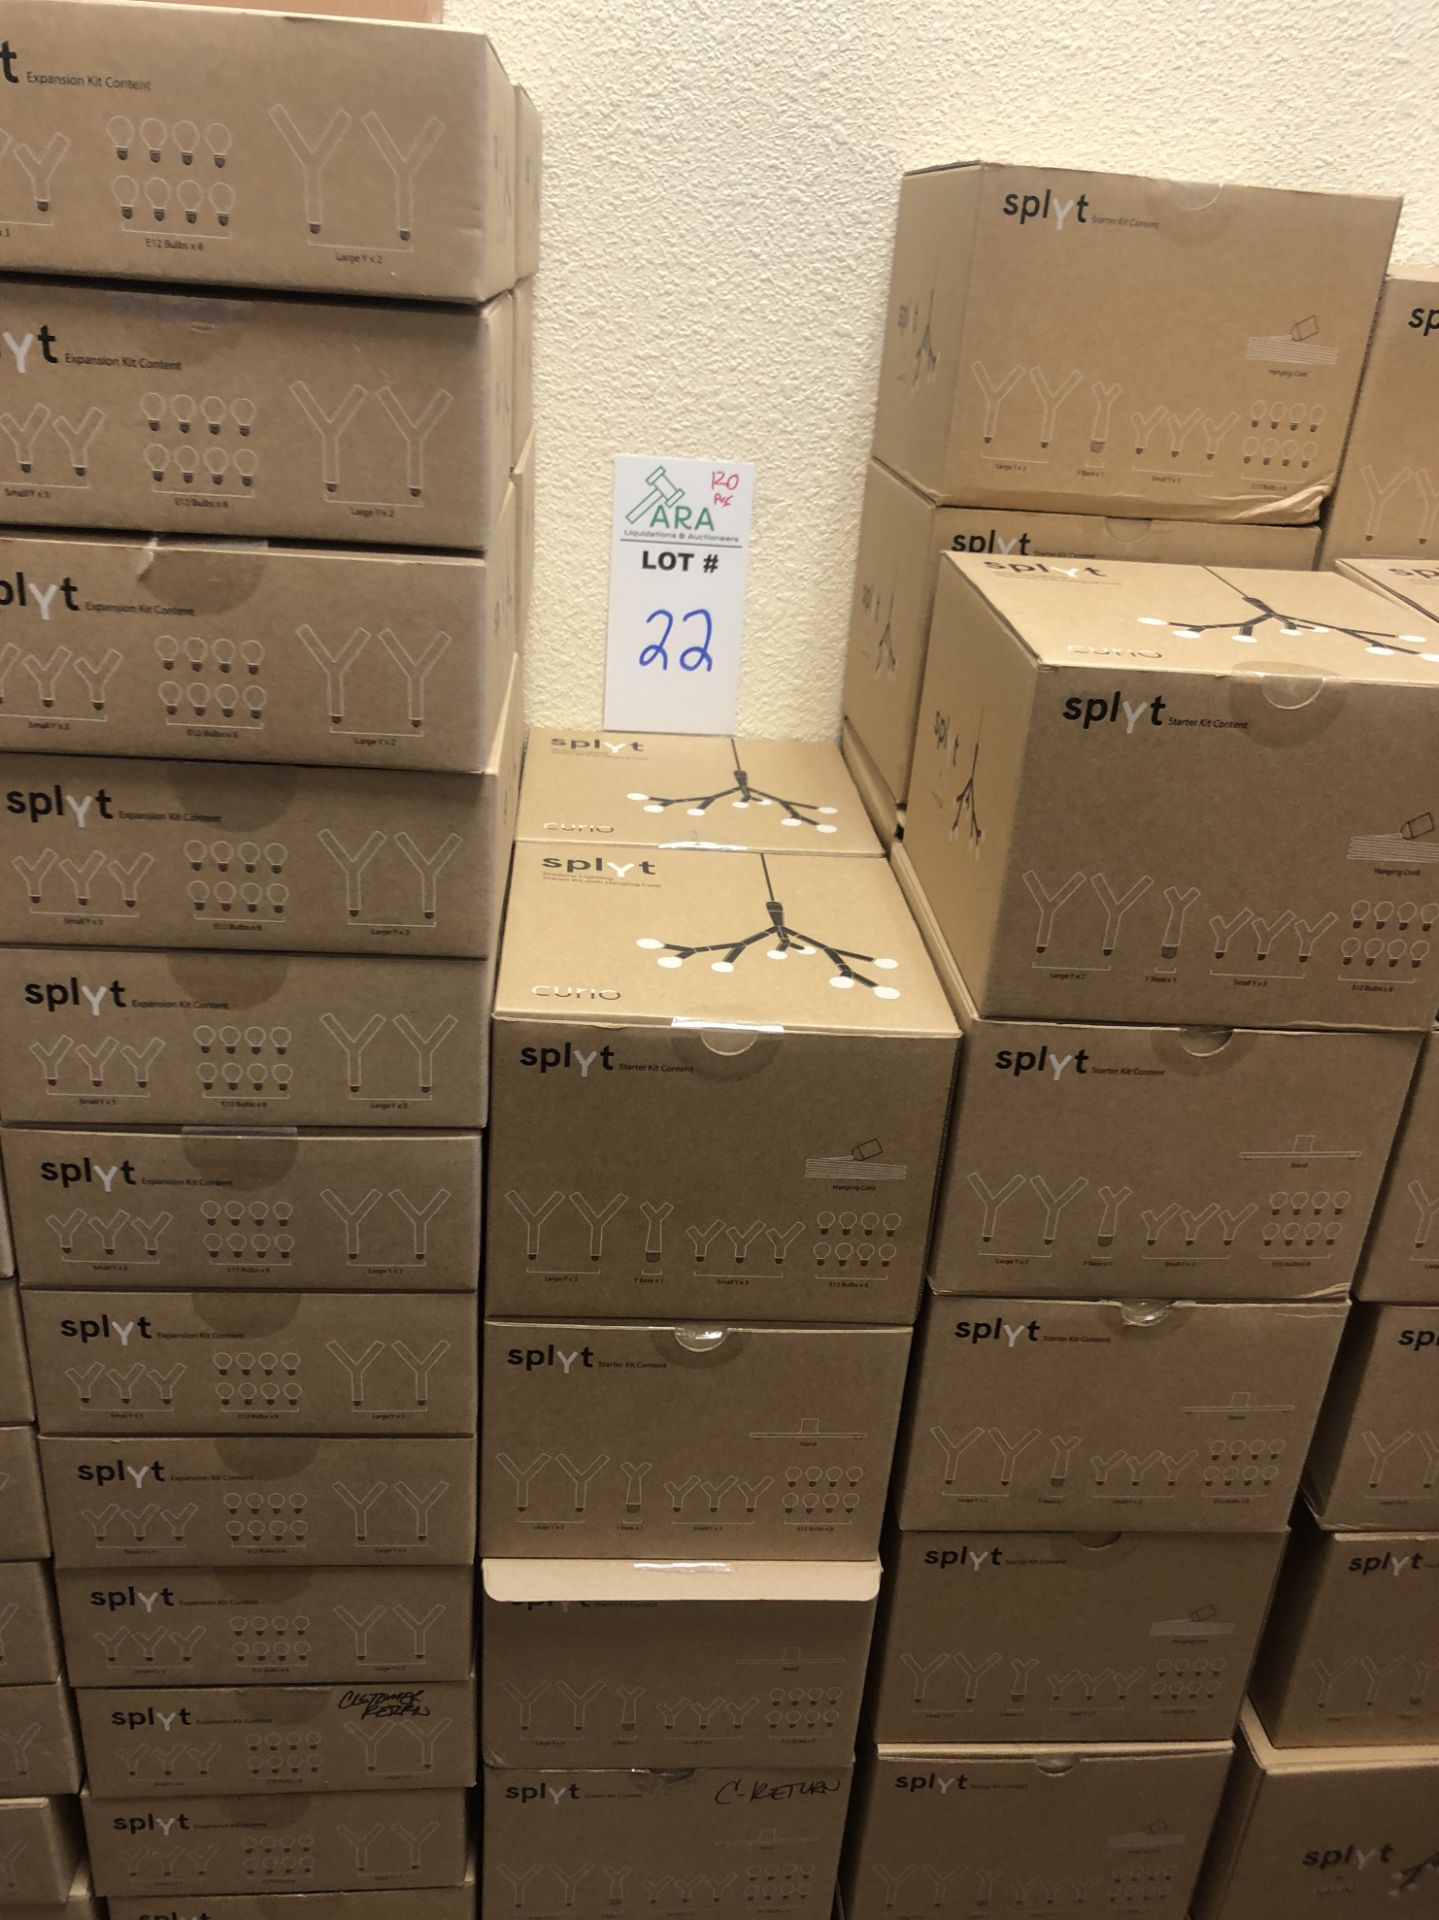 140 BOXES OF SPLYT DECORATIVE LIGHTING SYSTEMS $20,000 RETAIL VALUE PACKAGE - Image 3 of 6